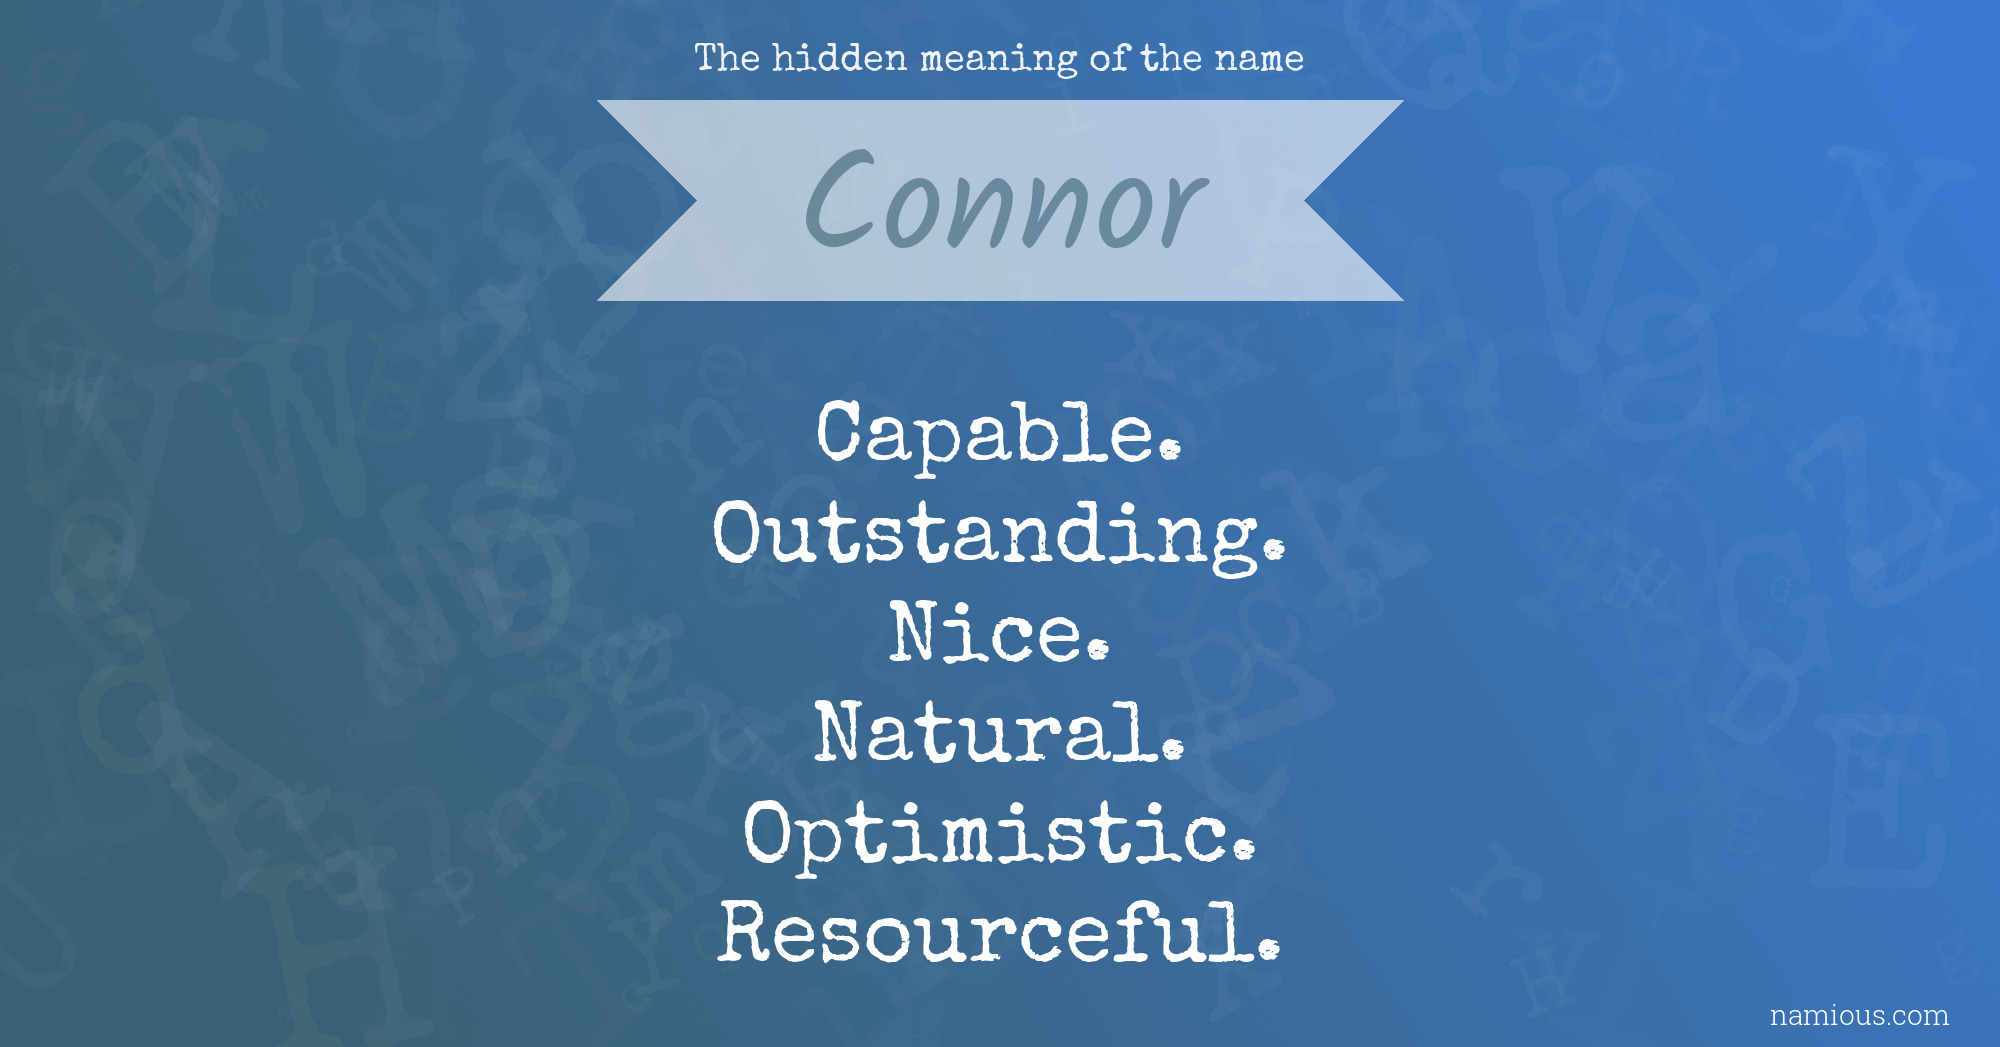 The hidden meaning of the name Connor